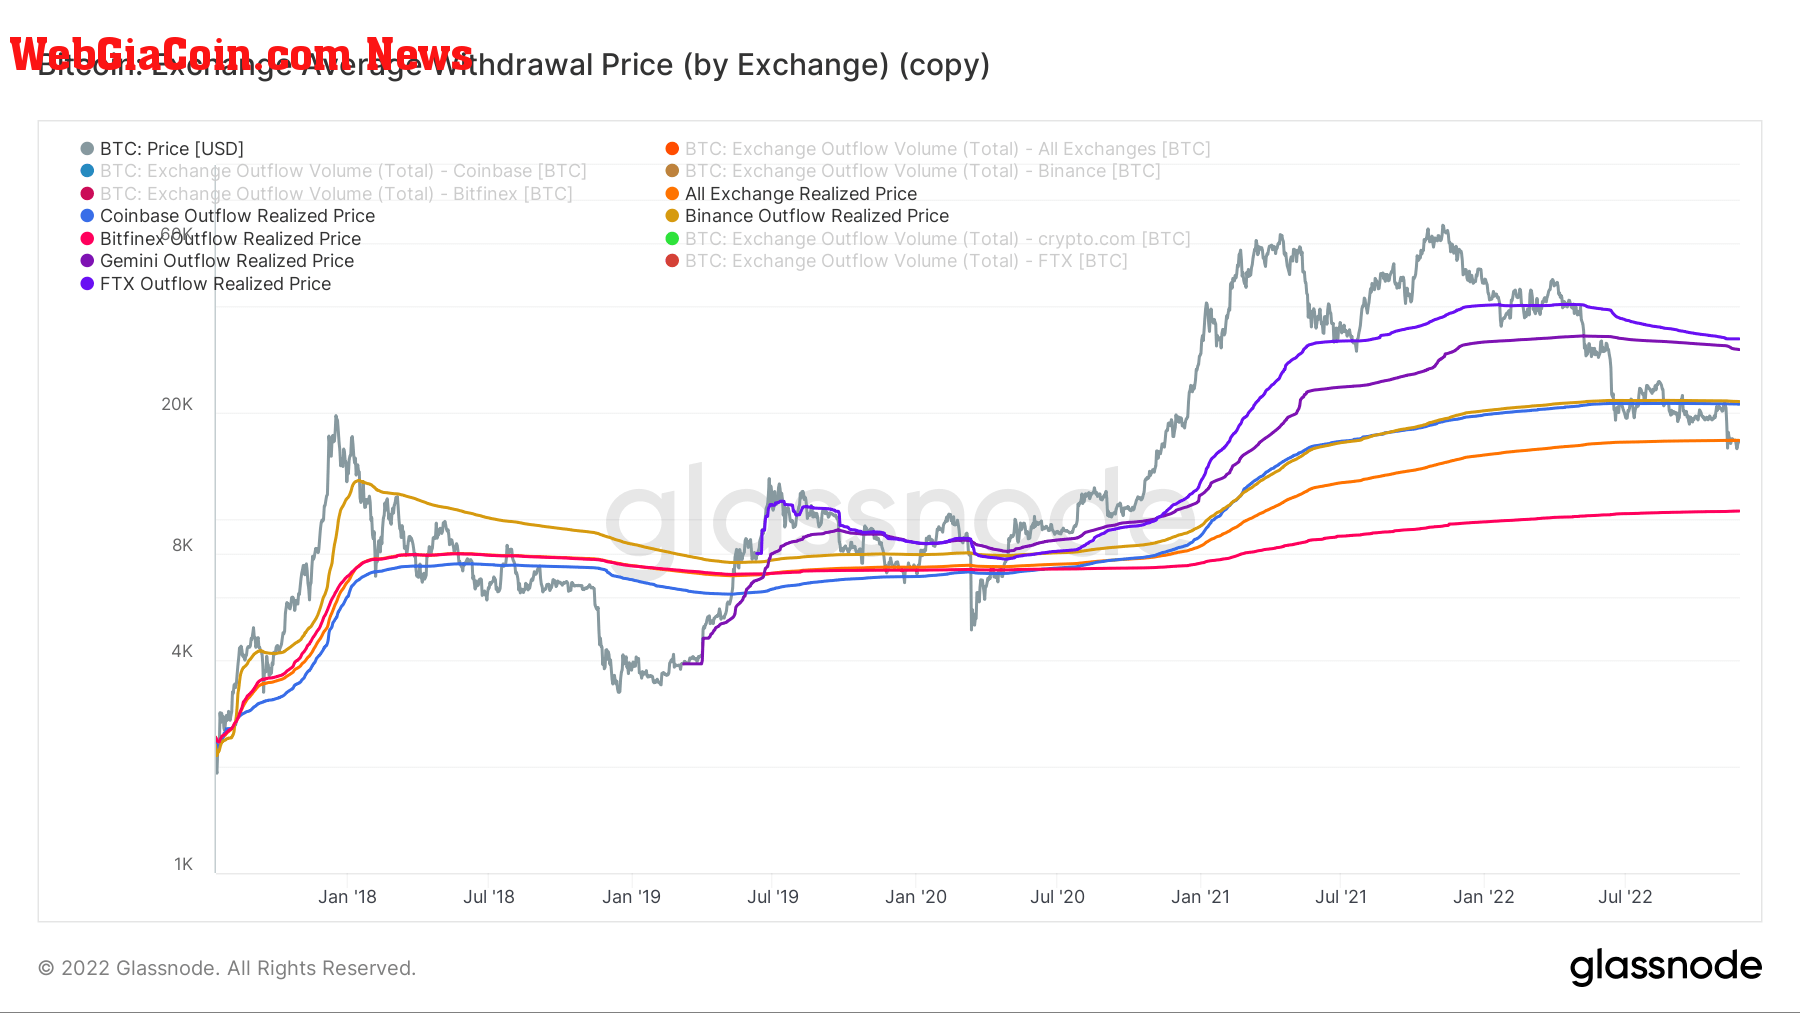 Bitcoin average withdrawal price across exchanges